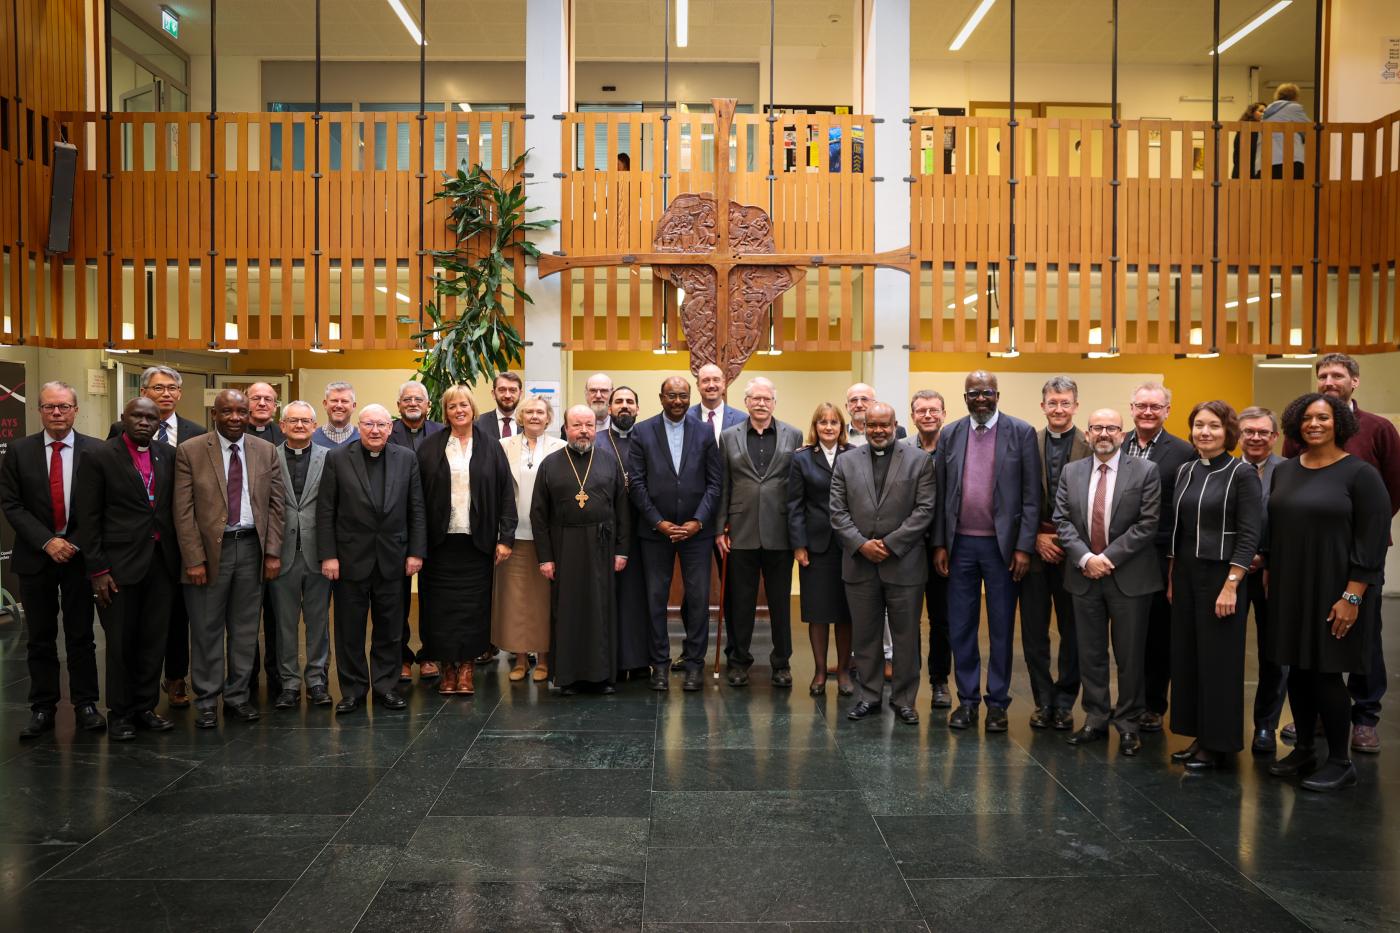 Group photo in the Ecumenical centre